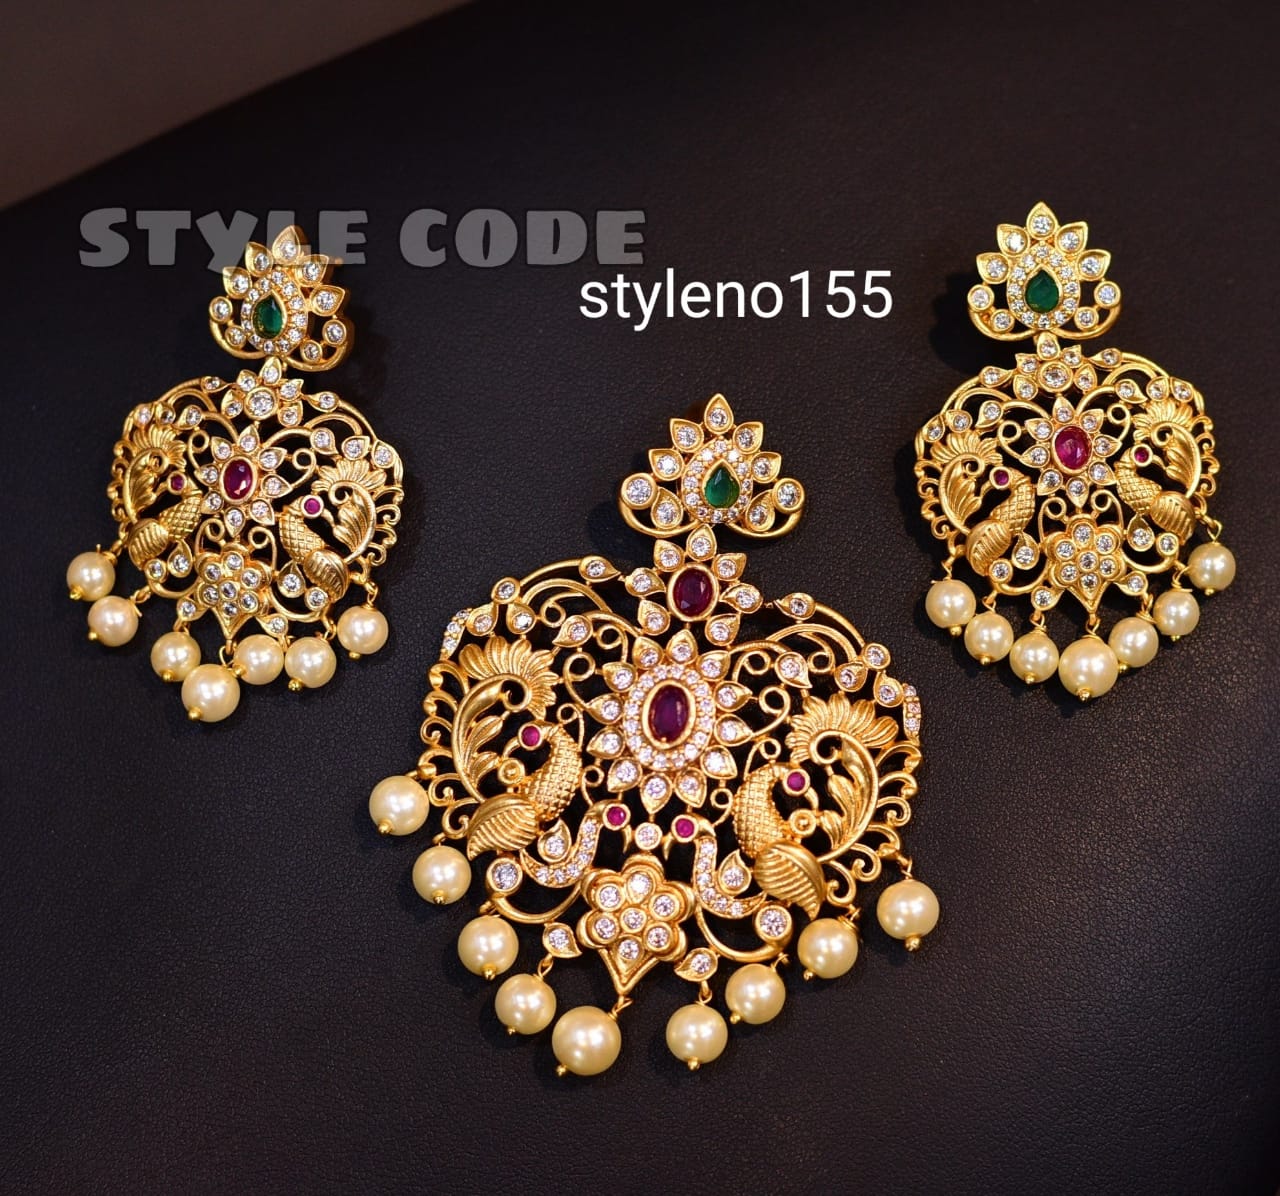 New Collection Of Style code and SBR 2020 - Indian Jewelry Designs